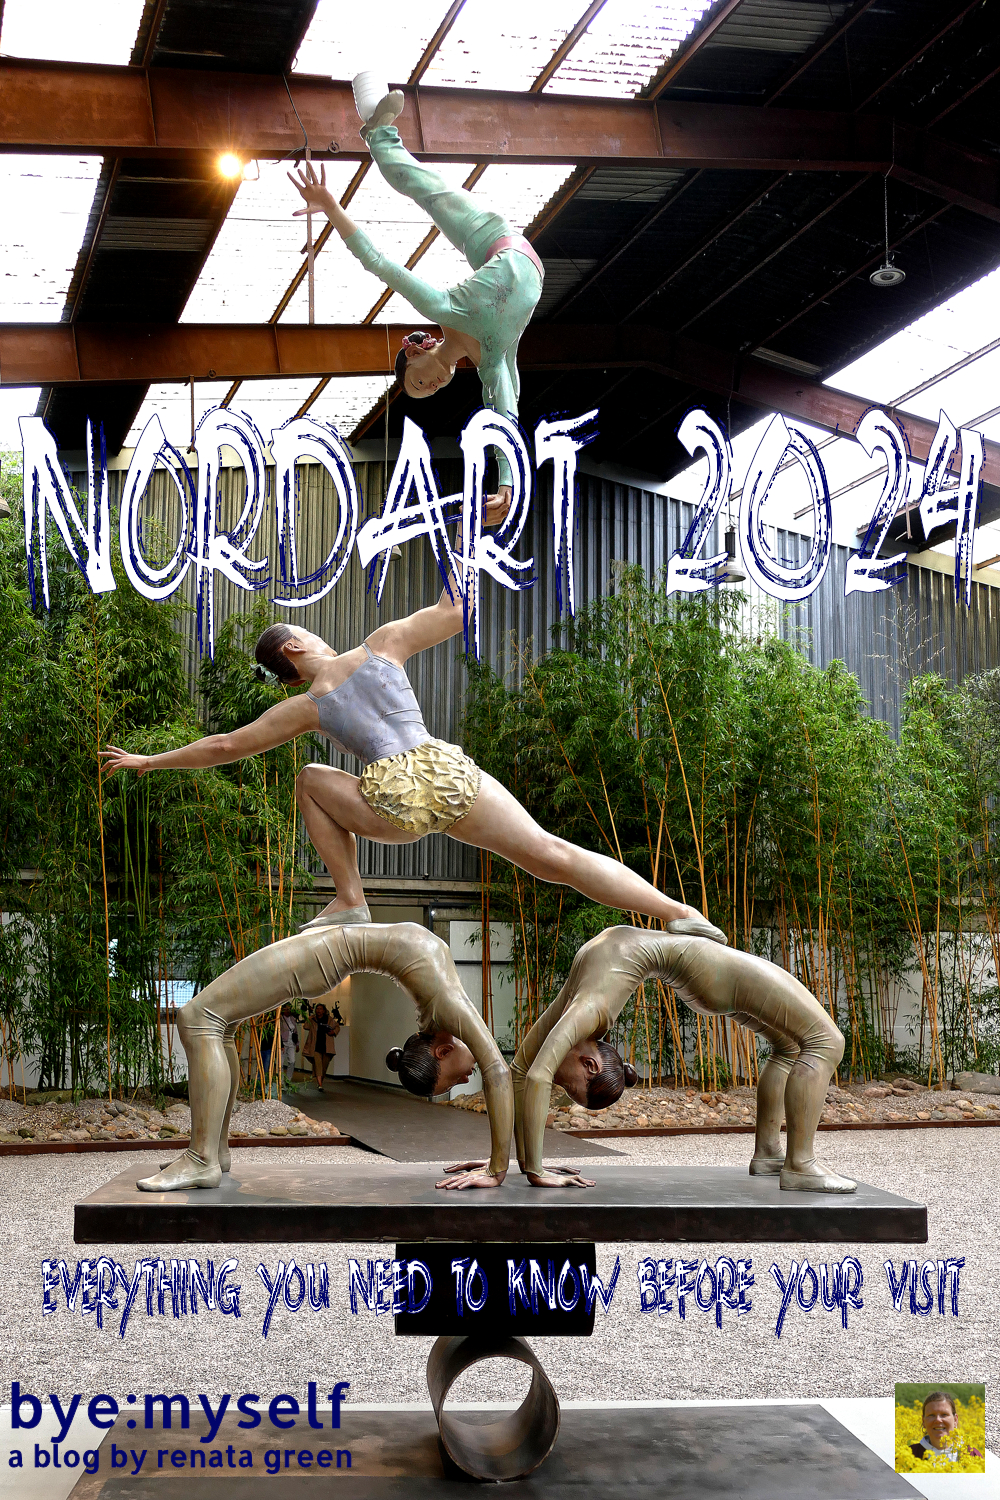 NordArt 2024 opened its doors and is once again presenting its visitors with a wealth of inspiring art. In this post I'll tell you everything you need to know for your visit to the NordArt 2024 - and where the fun-sounding venue Büdelsdorf is actually located. #nordart2024 #buedelsdorf #art #arttrip #rendsburg #germany #schleswigholstein #europe #weekendtrip #daytrip #arttrip #byemyself